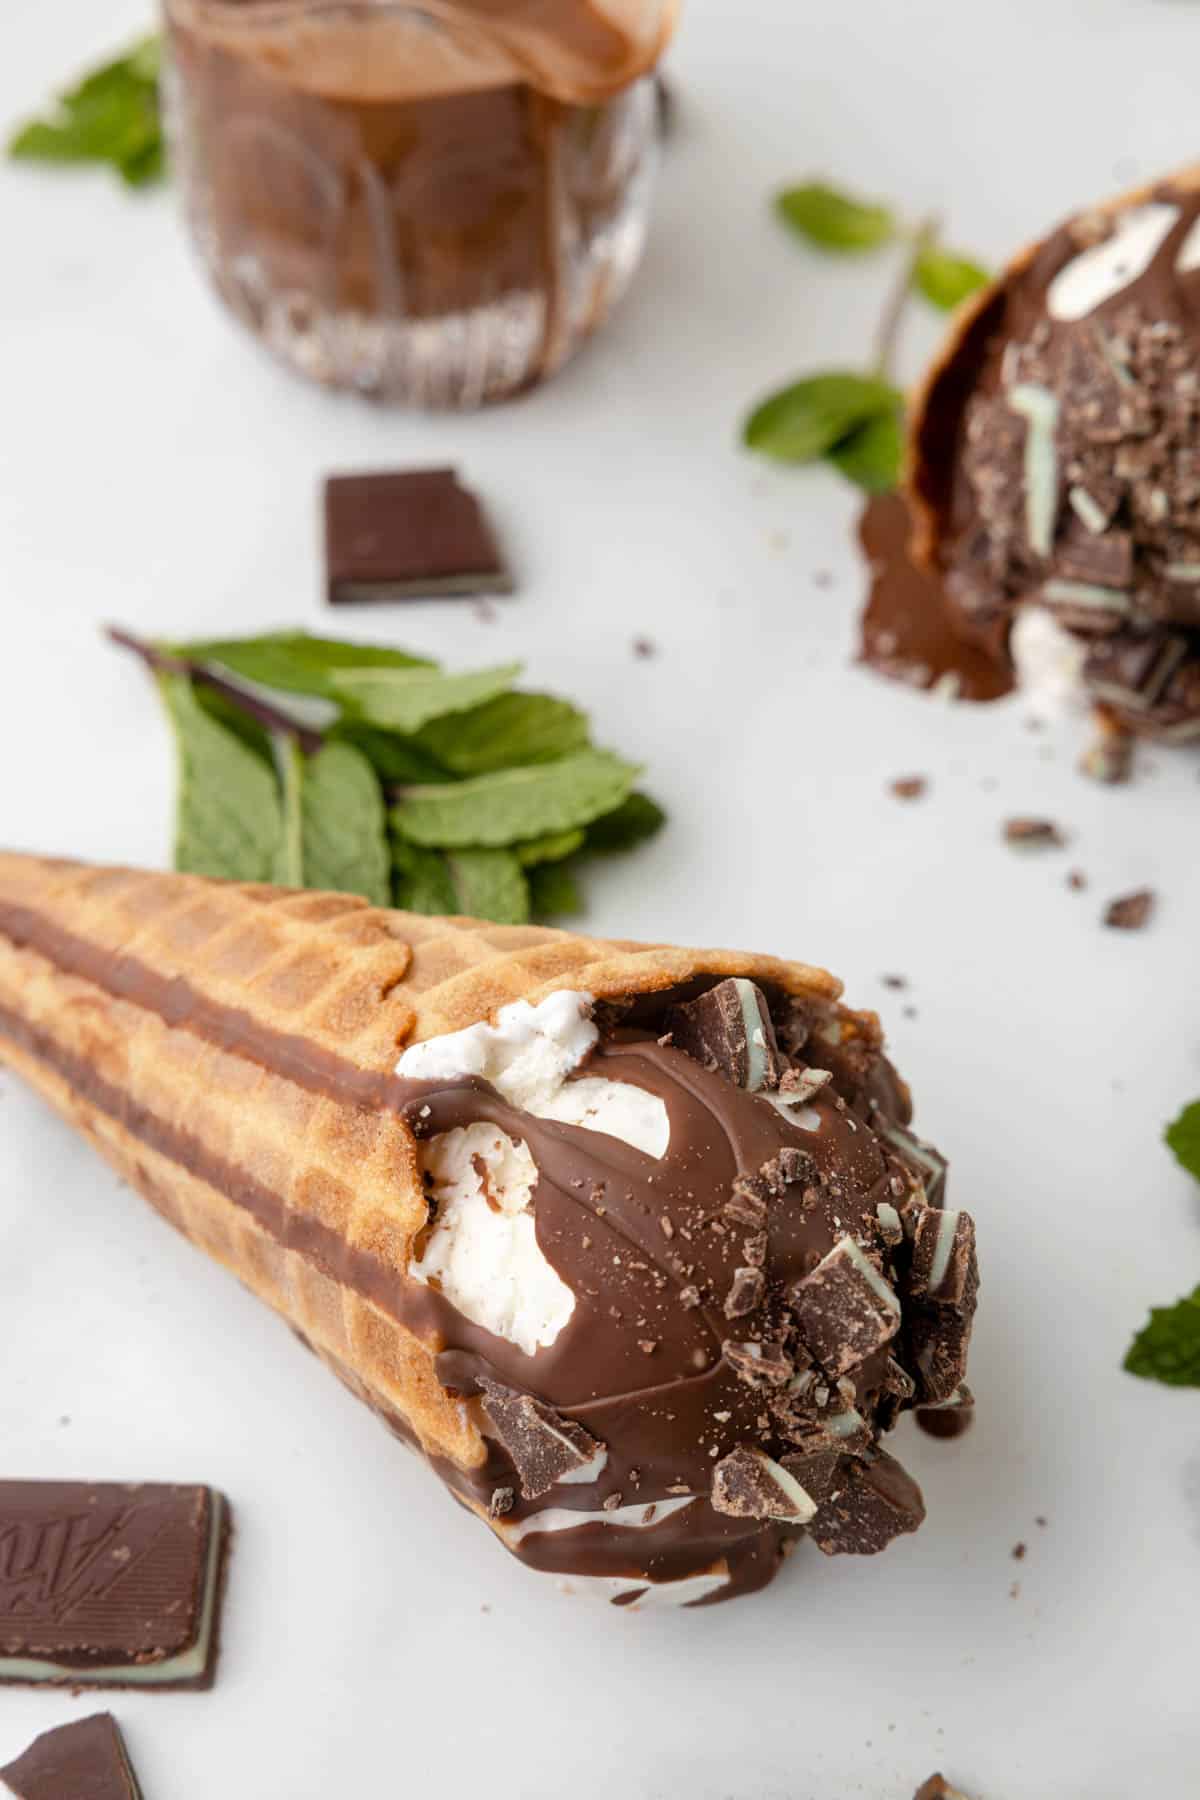 An ice cream cone with mint chocolate magic shell topping next to fresh mint leaves.